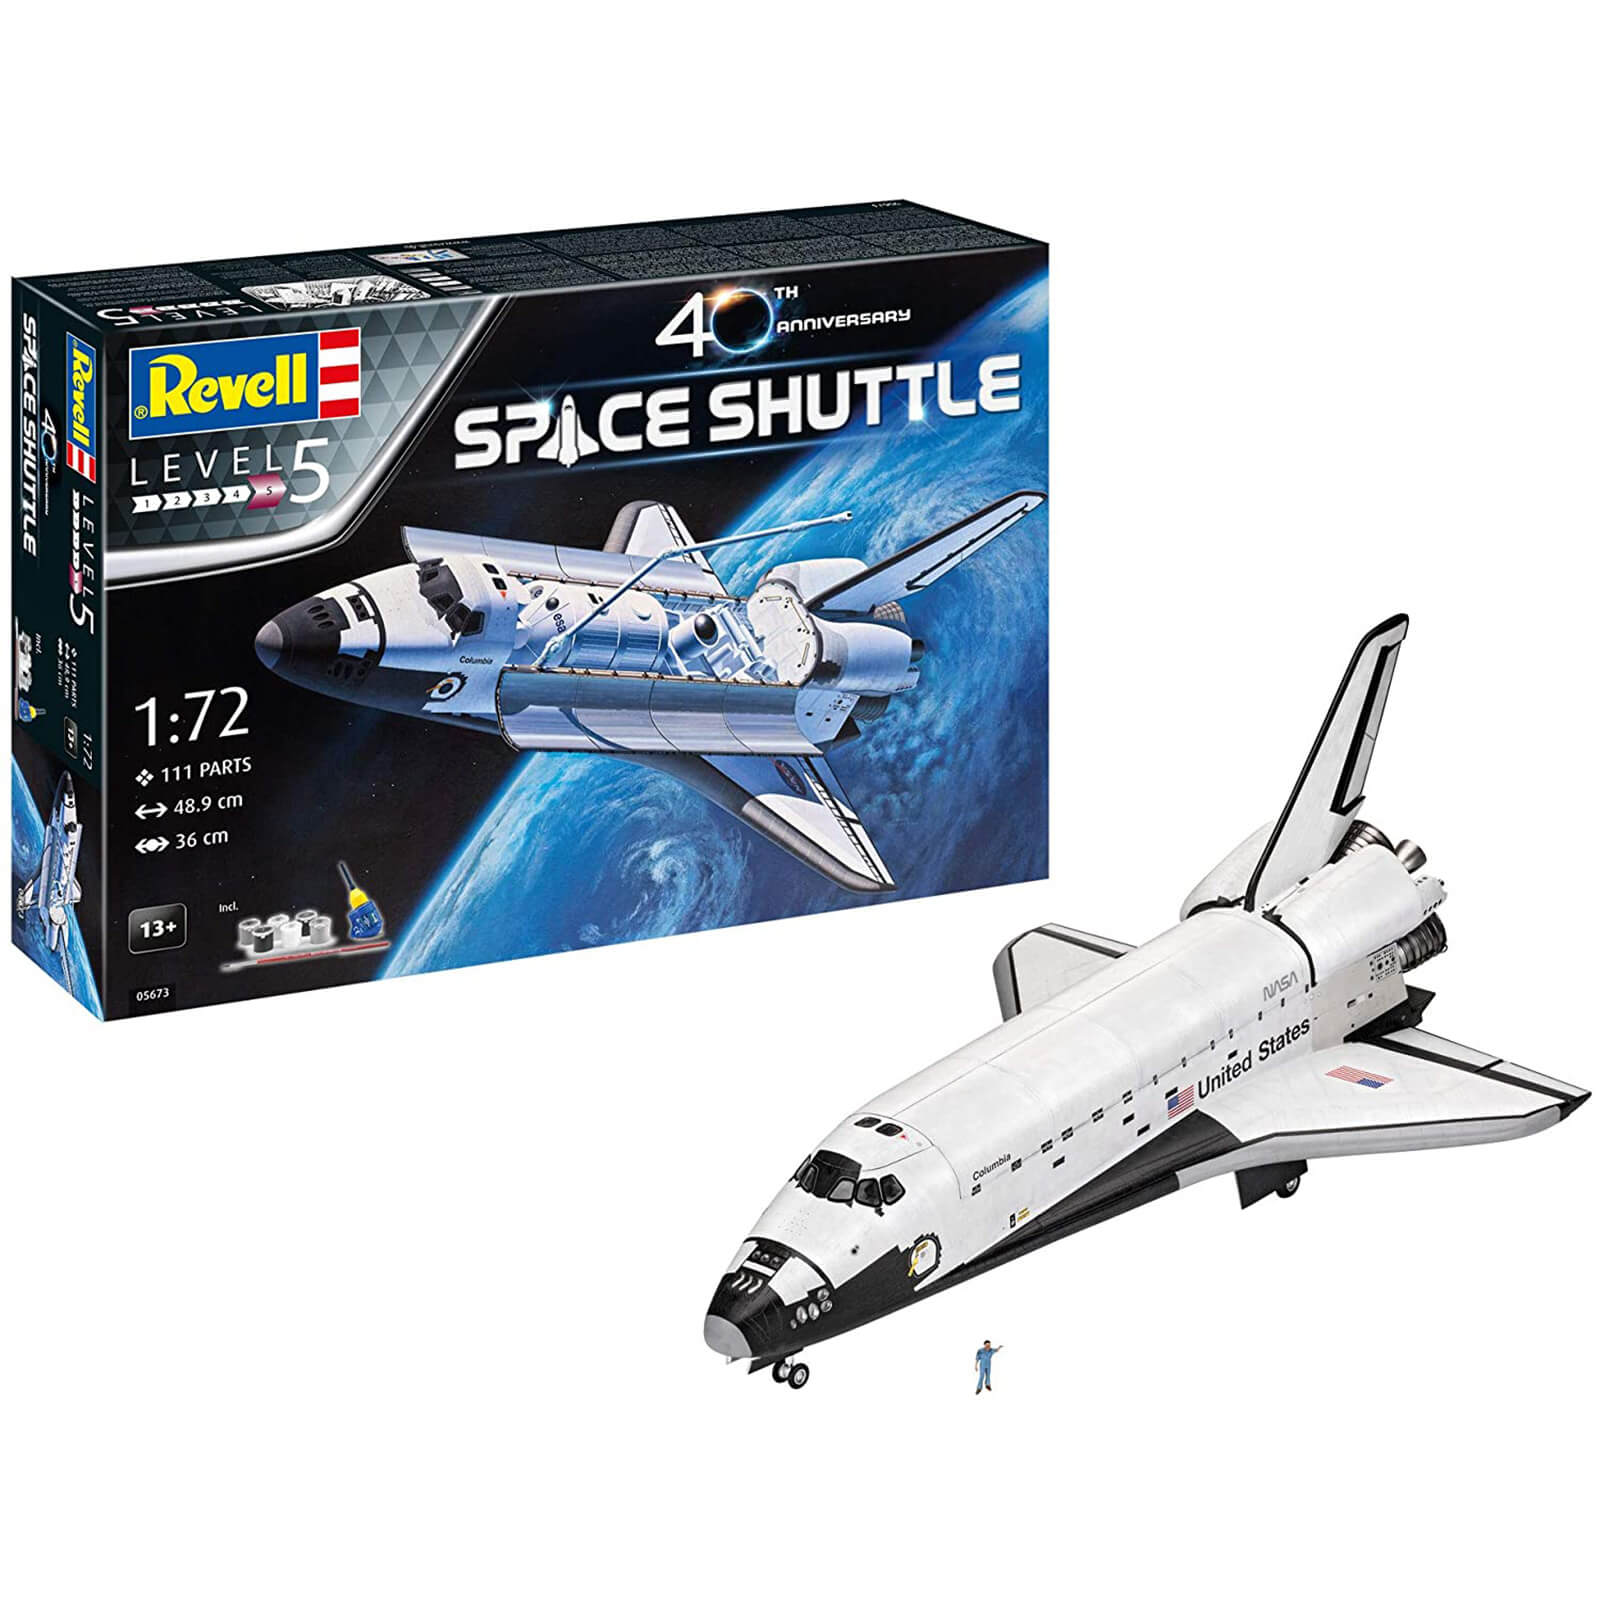 Revell Nasa Space Shuttle 40th Anniversary Gift Set 1:72 Scale